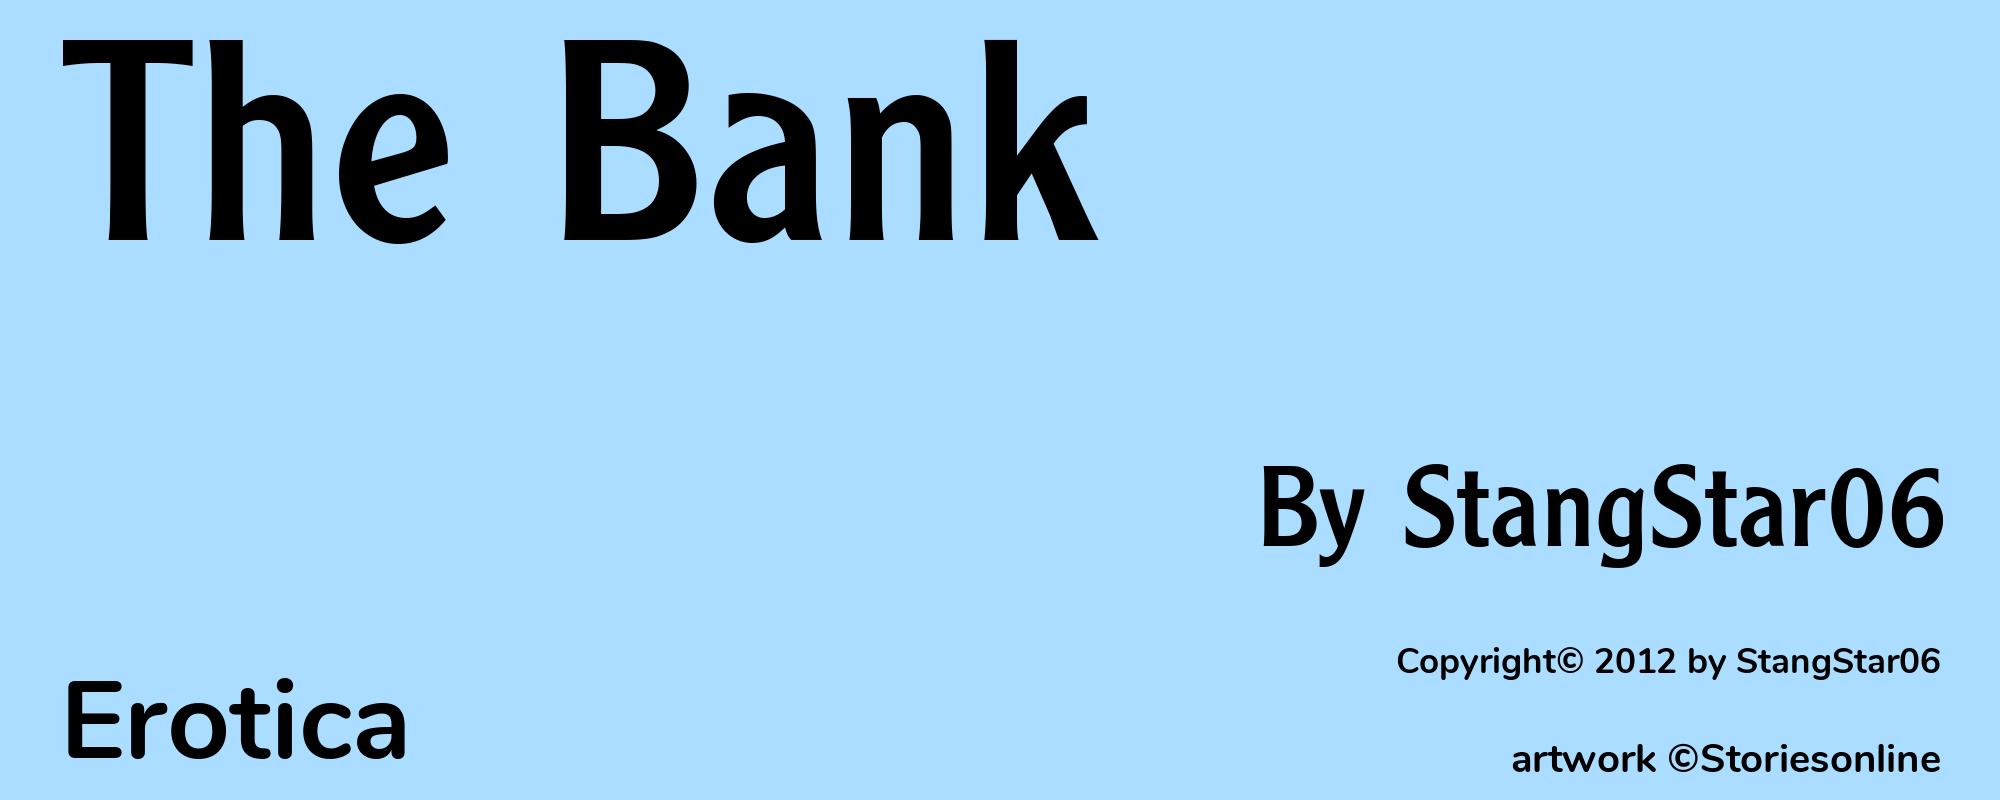 The Bank - Cover